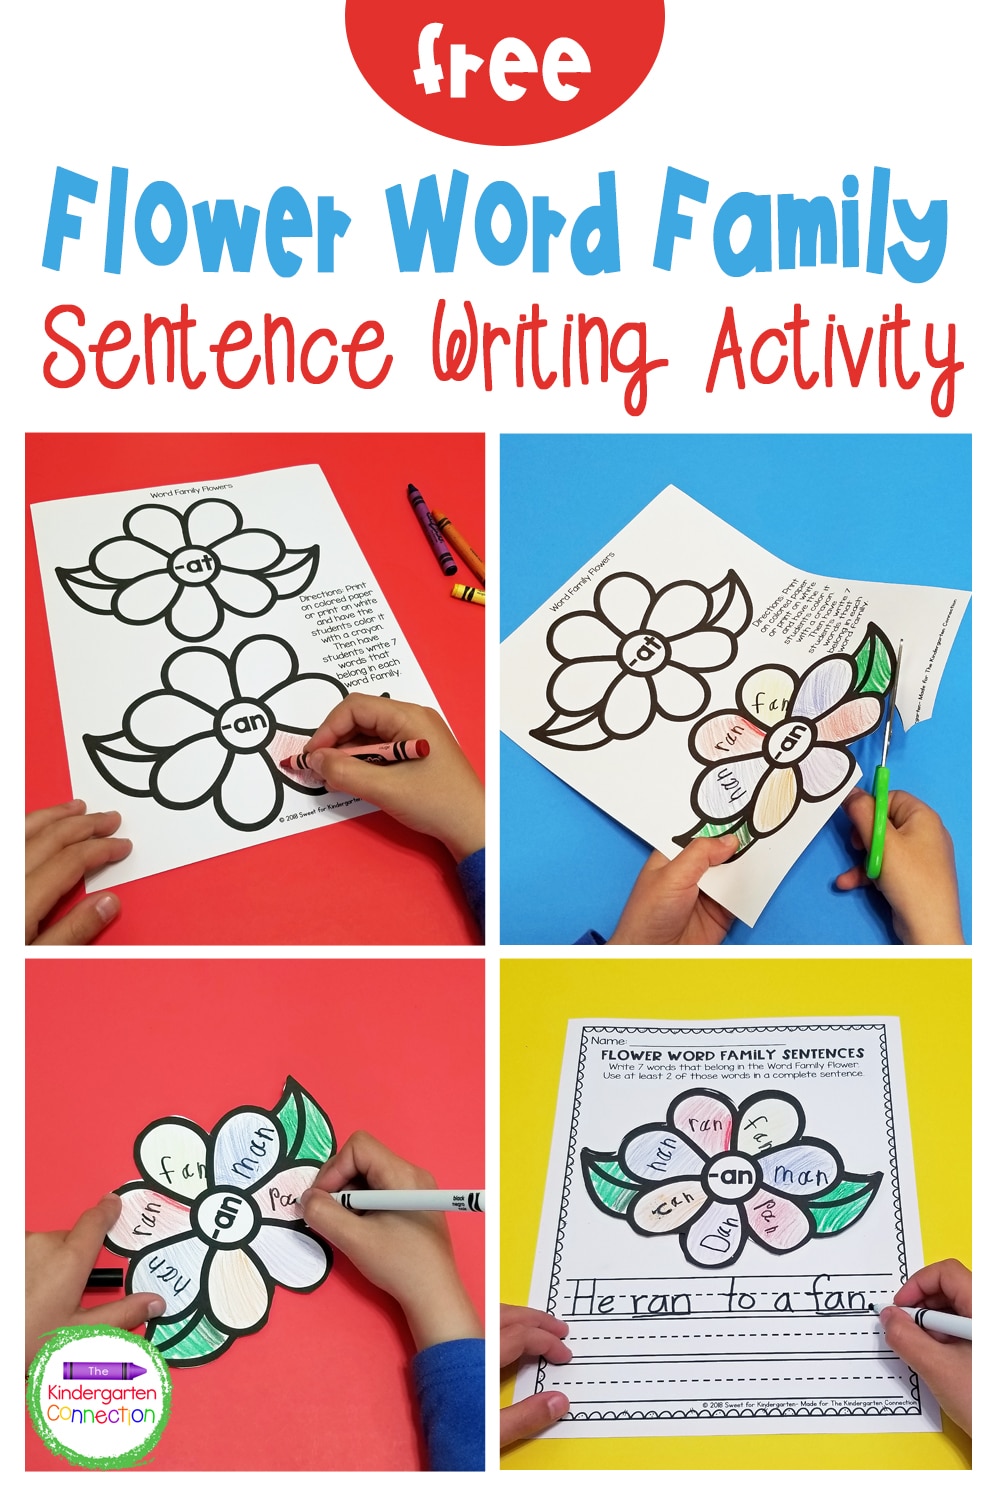 This free Flower Word Family Sentences Activity is a fun way for early learners to practice word families and sentence writing all in one!